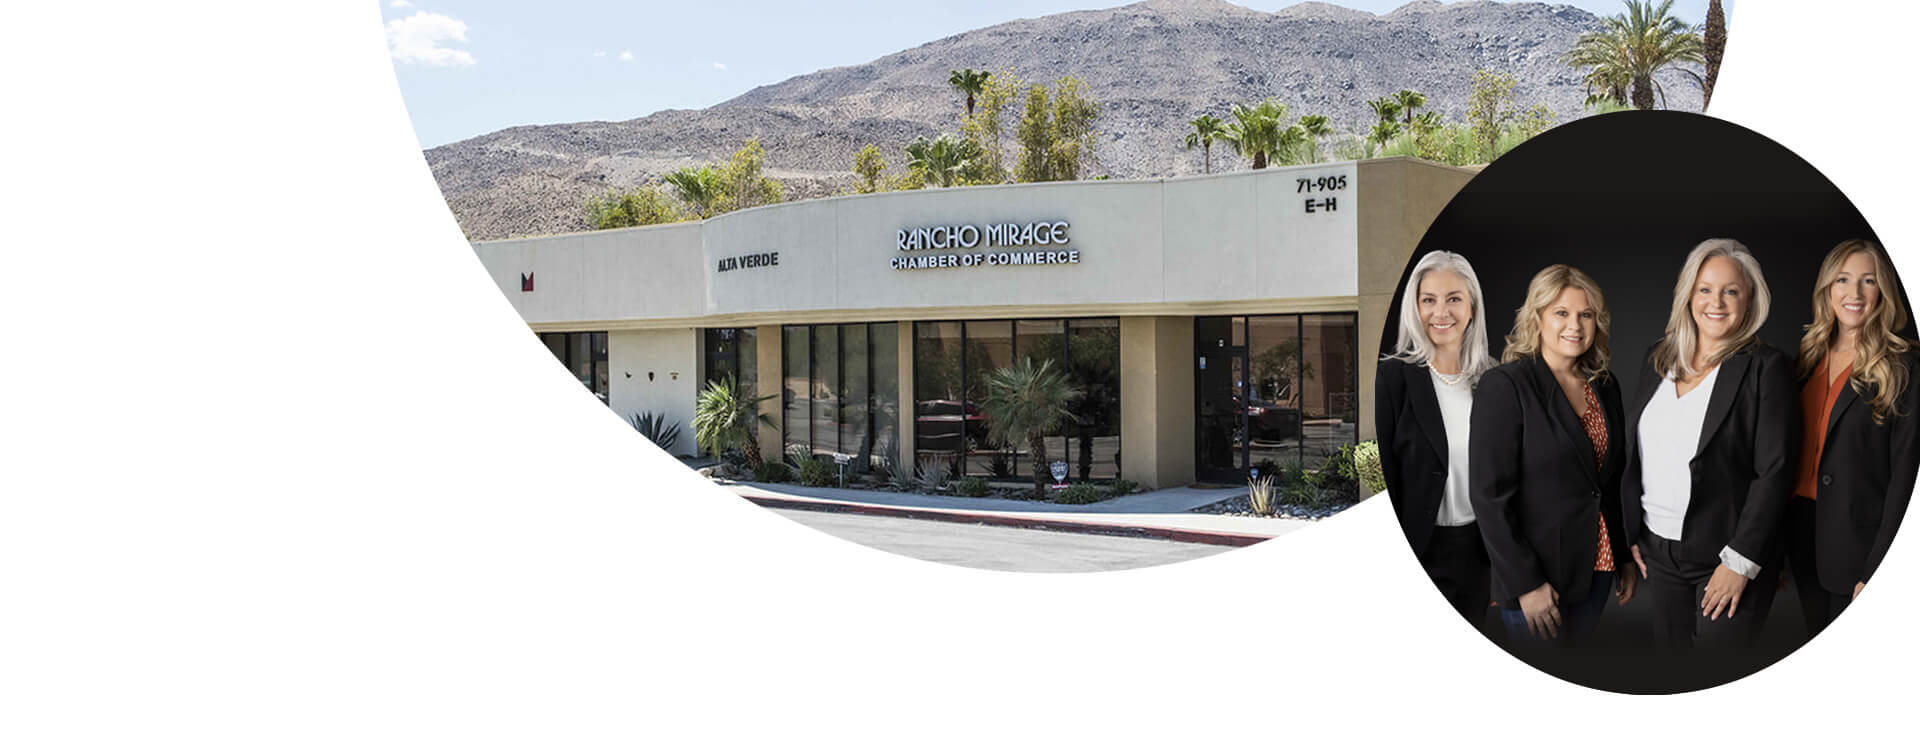 Rancho Mirage Chamber Of Commerce